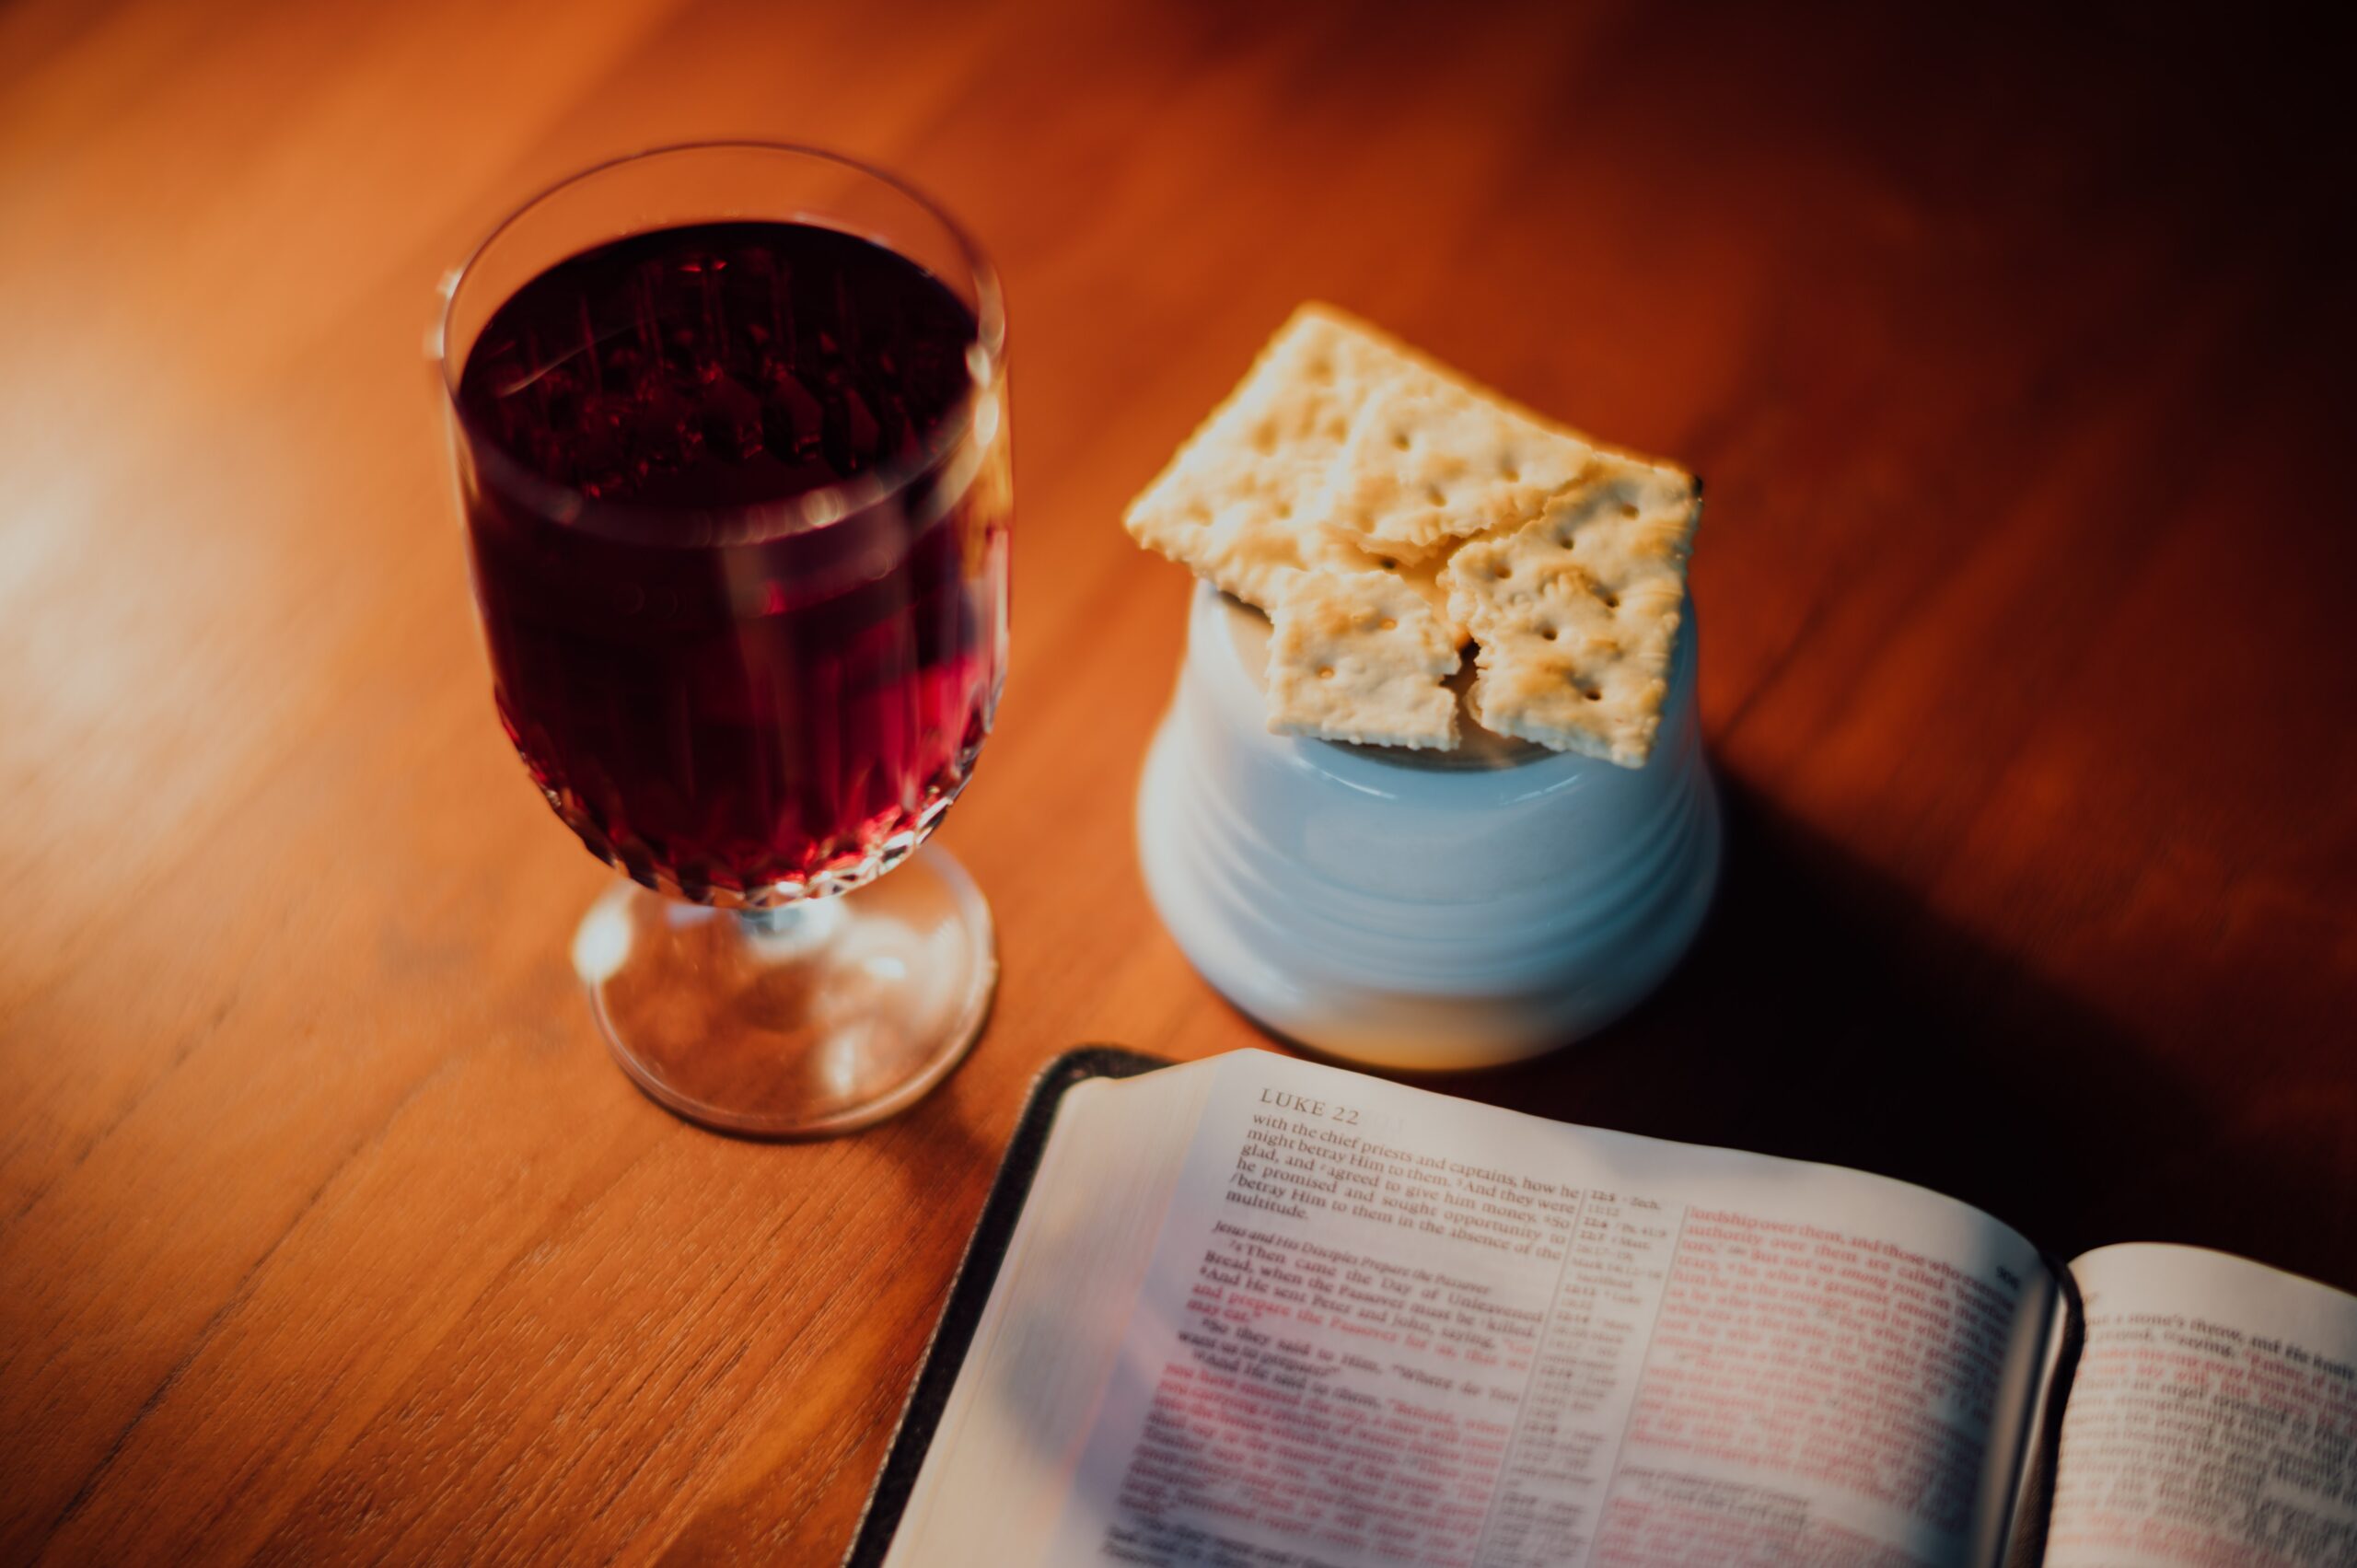 Finding Christ in the Passover